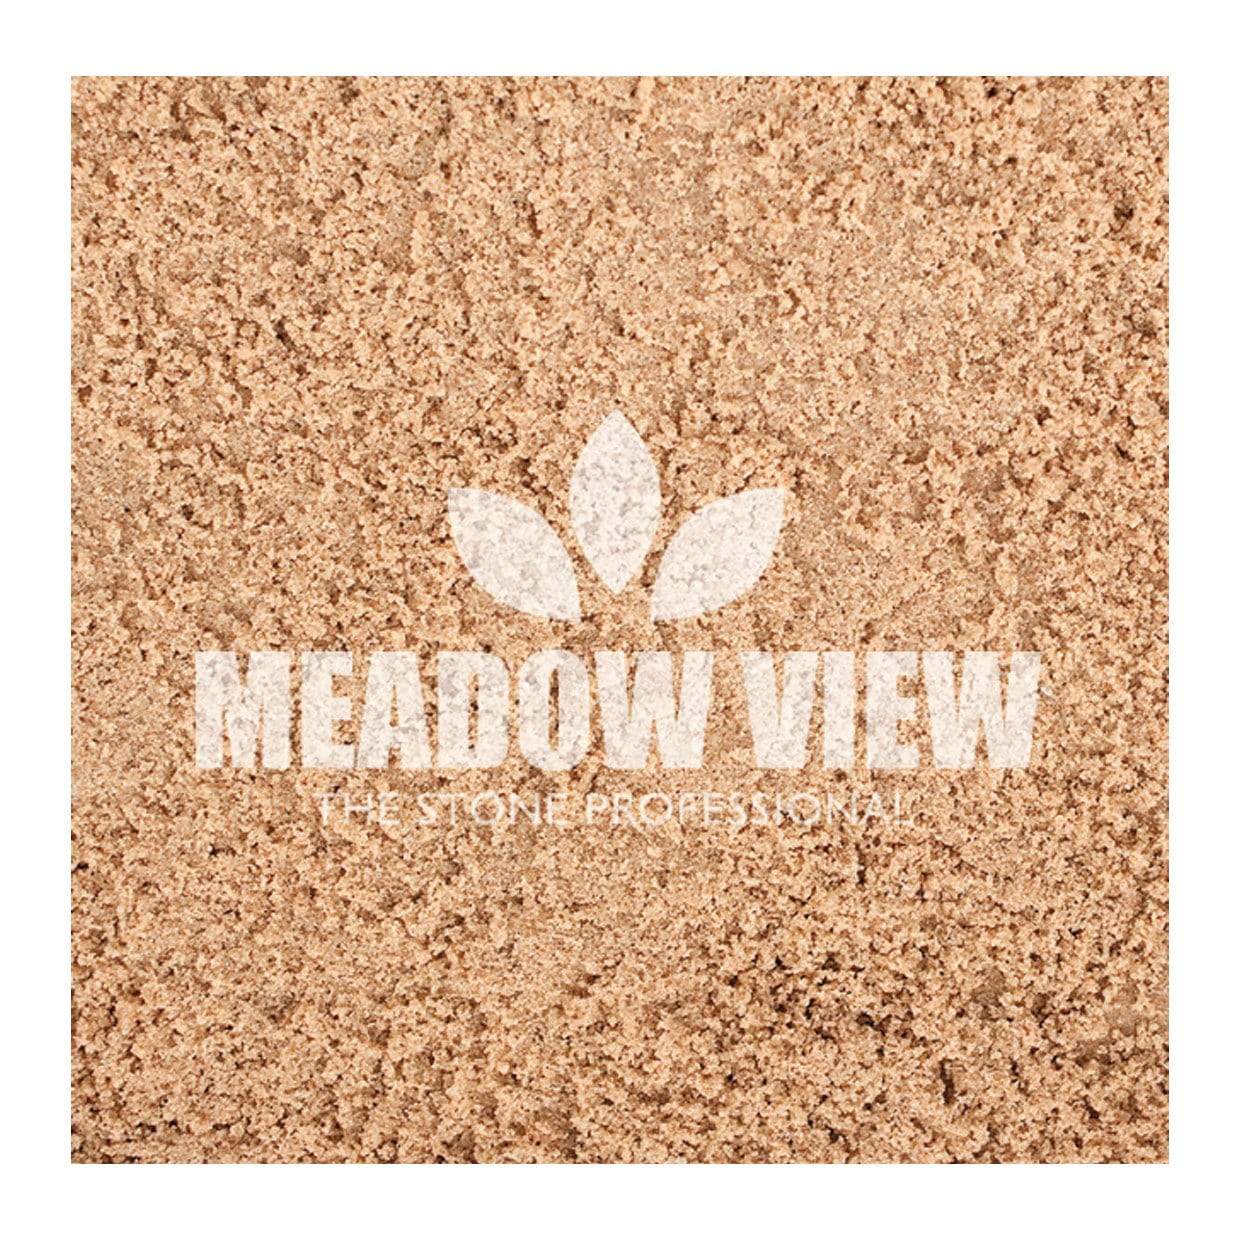 Meadow View Landscaping Horticultural Silver Sand c.1mm